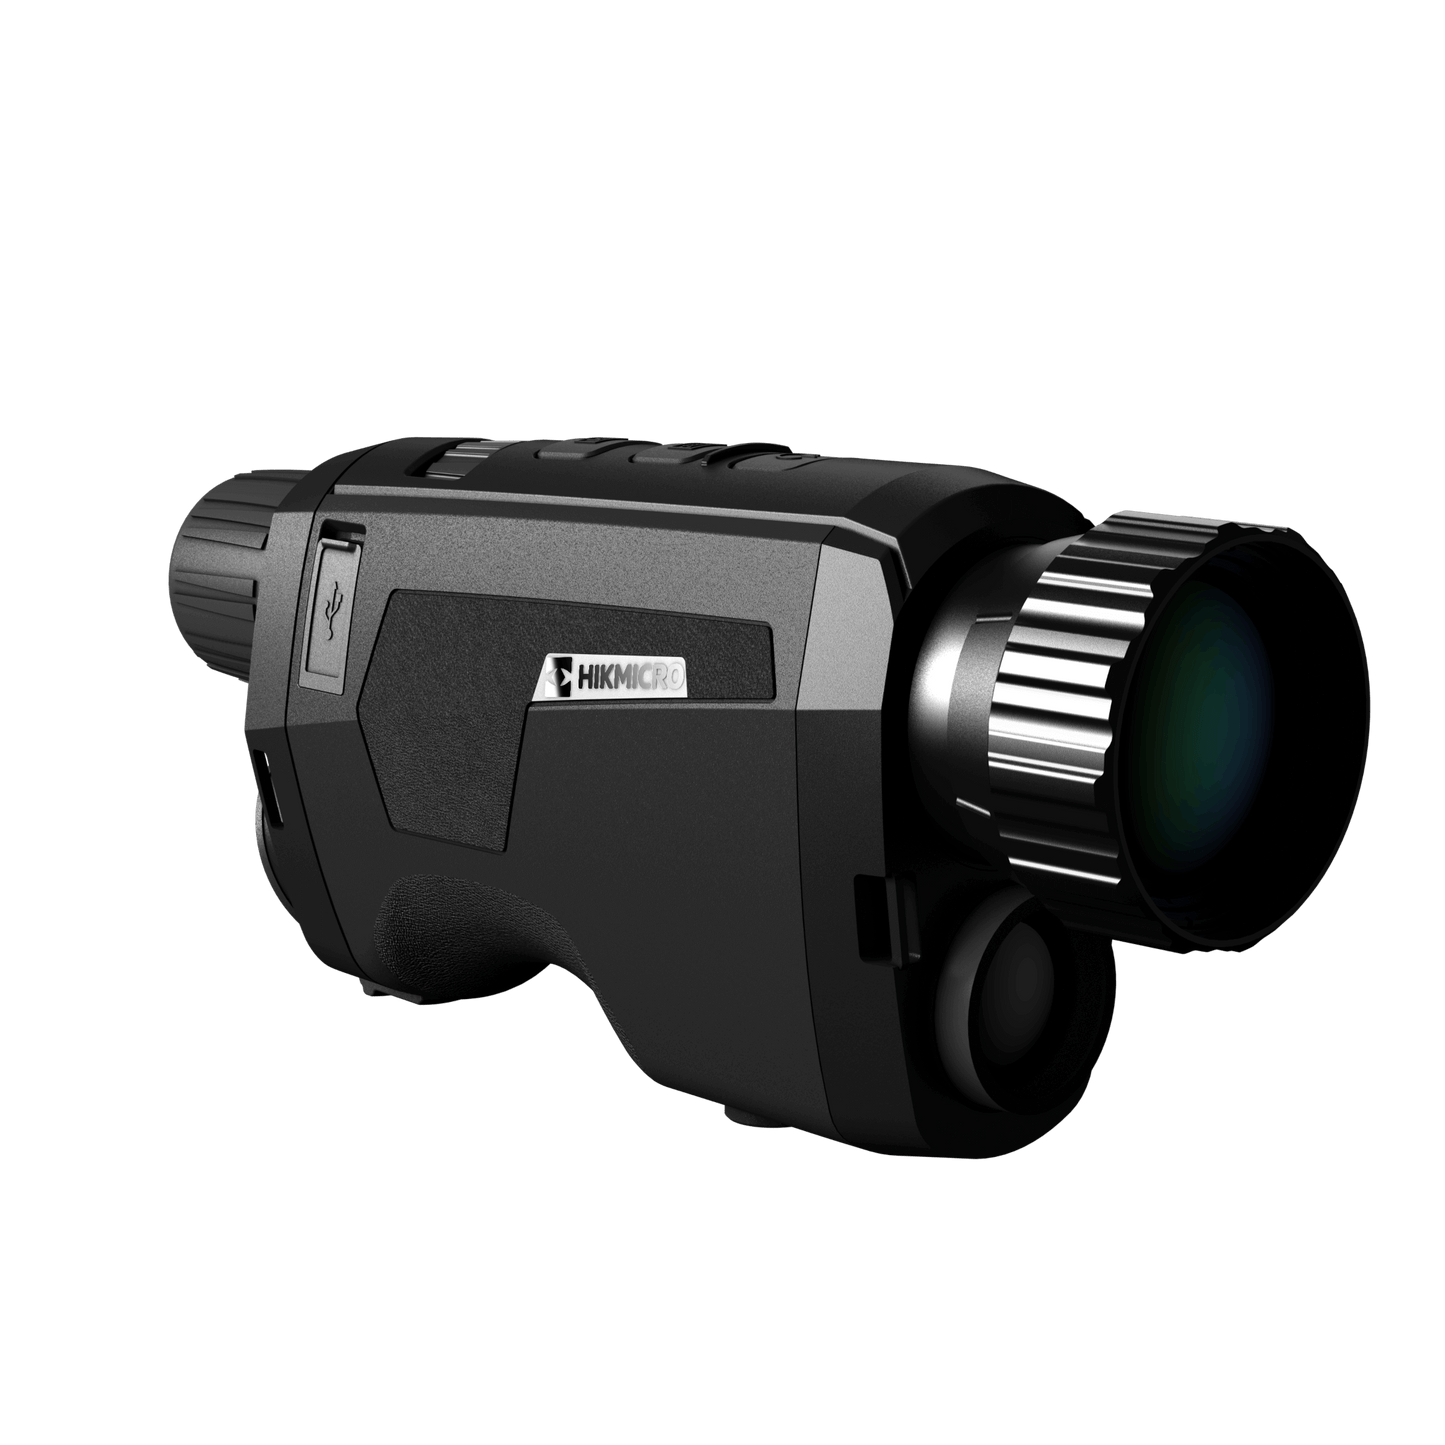 Cape Thermal imaging monocular for sale - HikMicro Gryphon GQ50L Handheld thermal monocular front left view